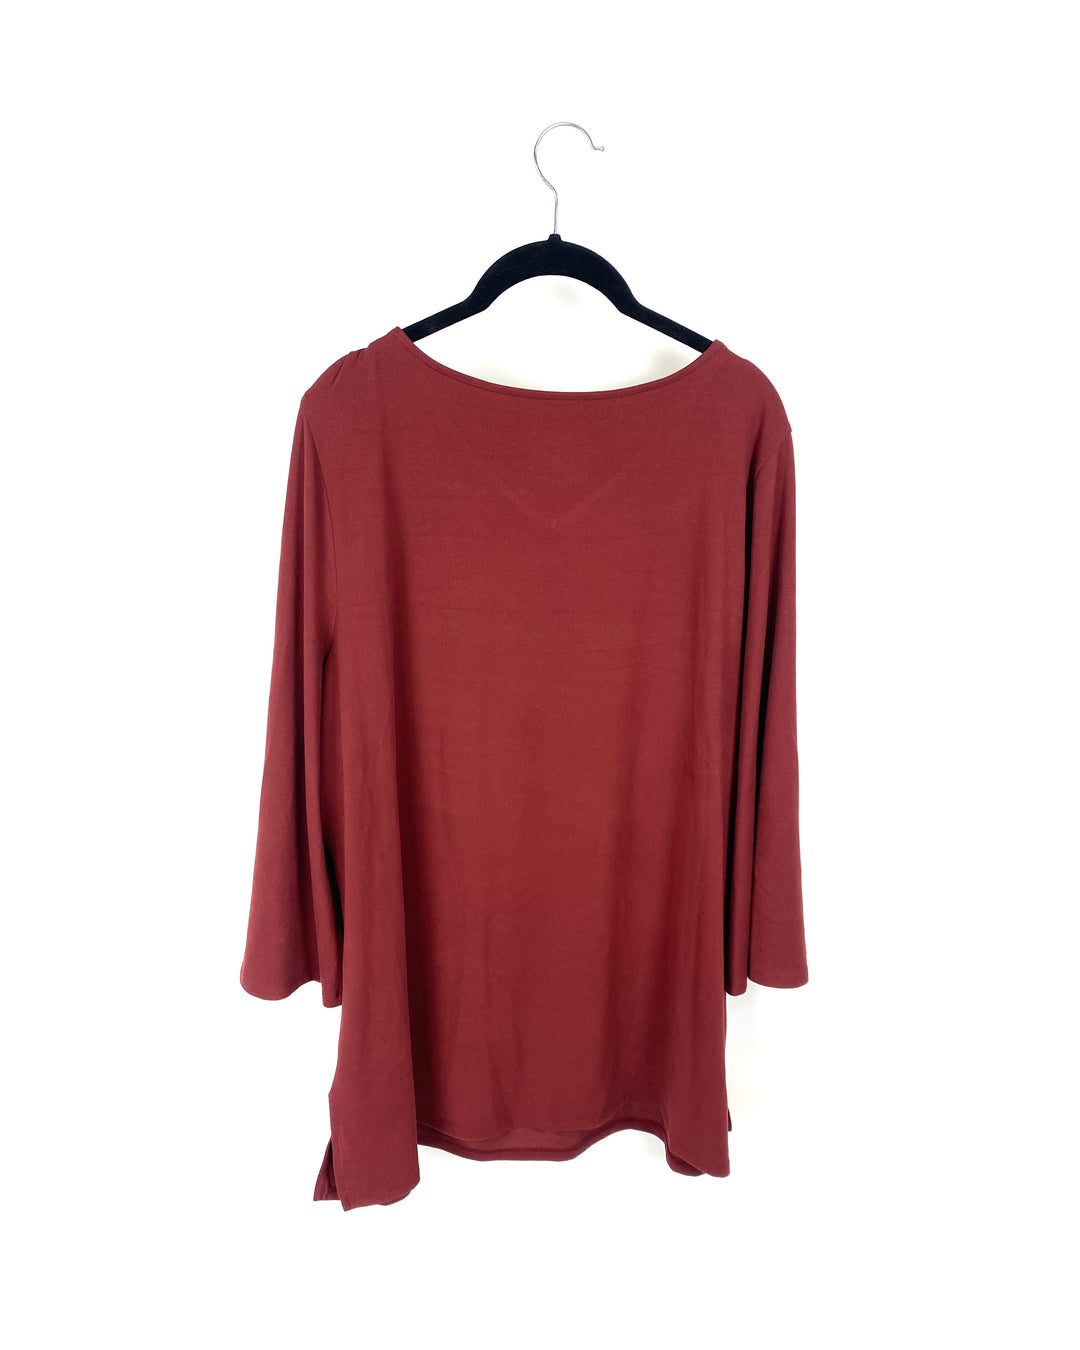 Red Cutout Shoulder Top - Small/Medium, Large/Extra Large